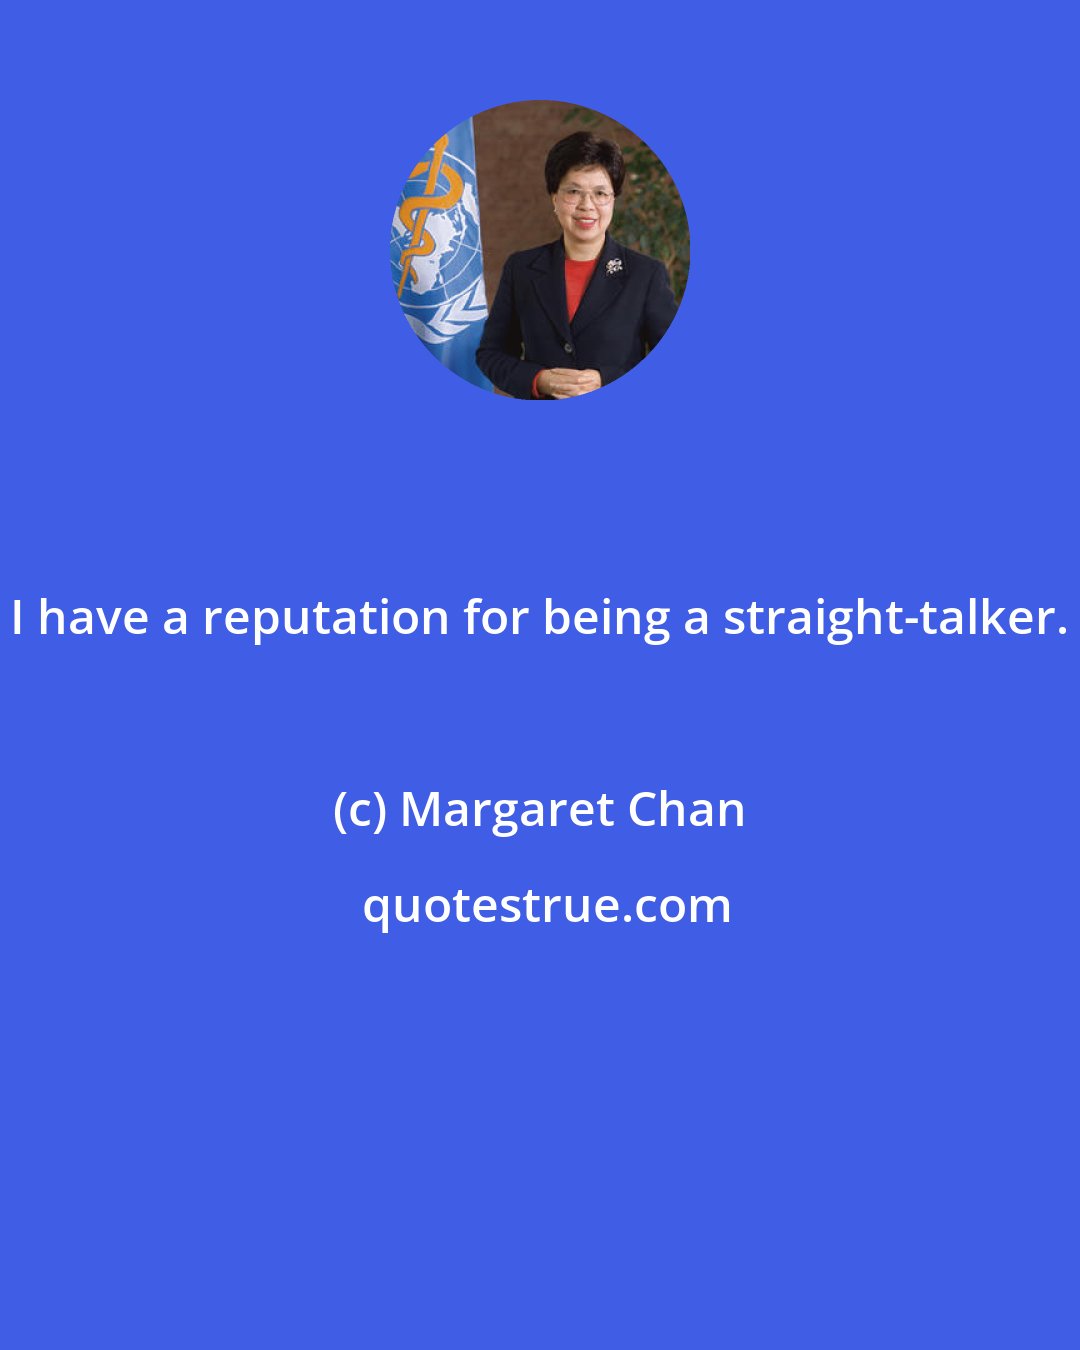 Margaret Chan: I have a reputation for being a straight-talker.